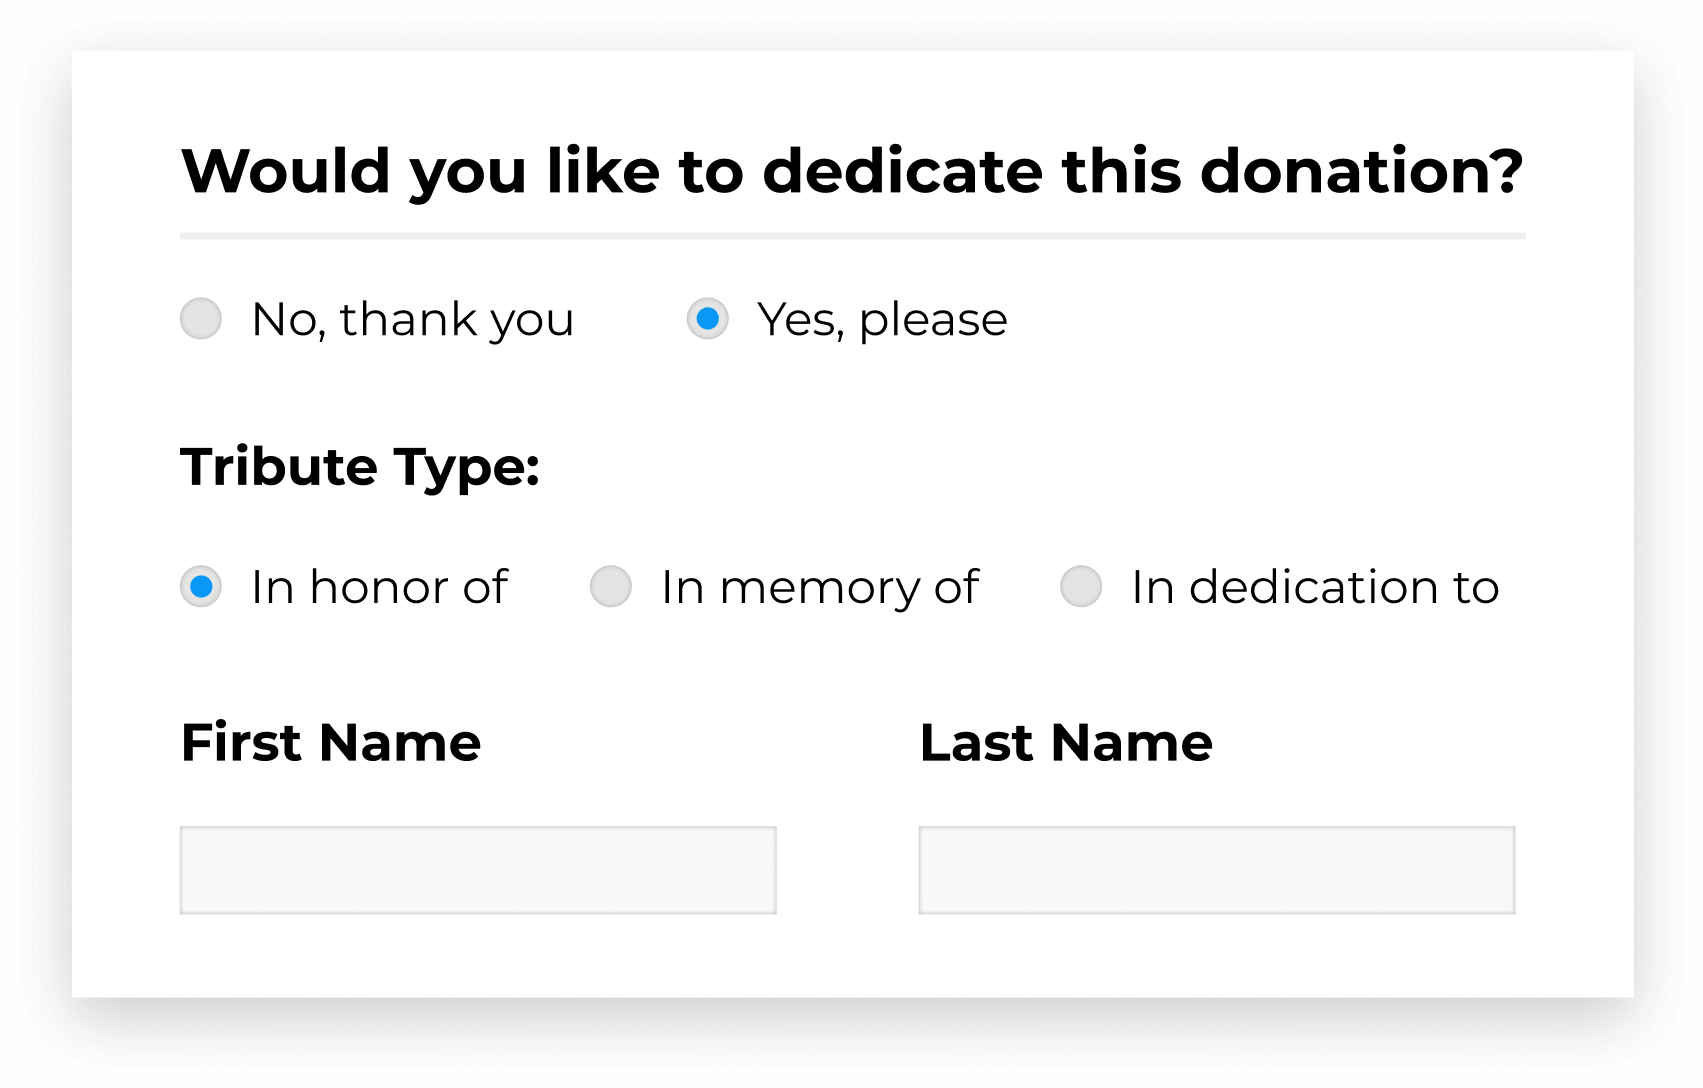 Would you like to dedicate this donation? Choose a tribute type and provide the contact information.